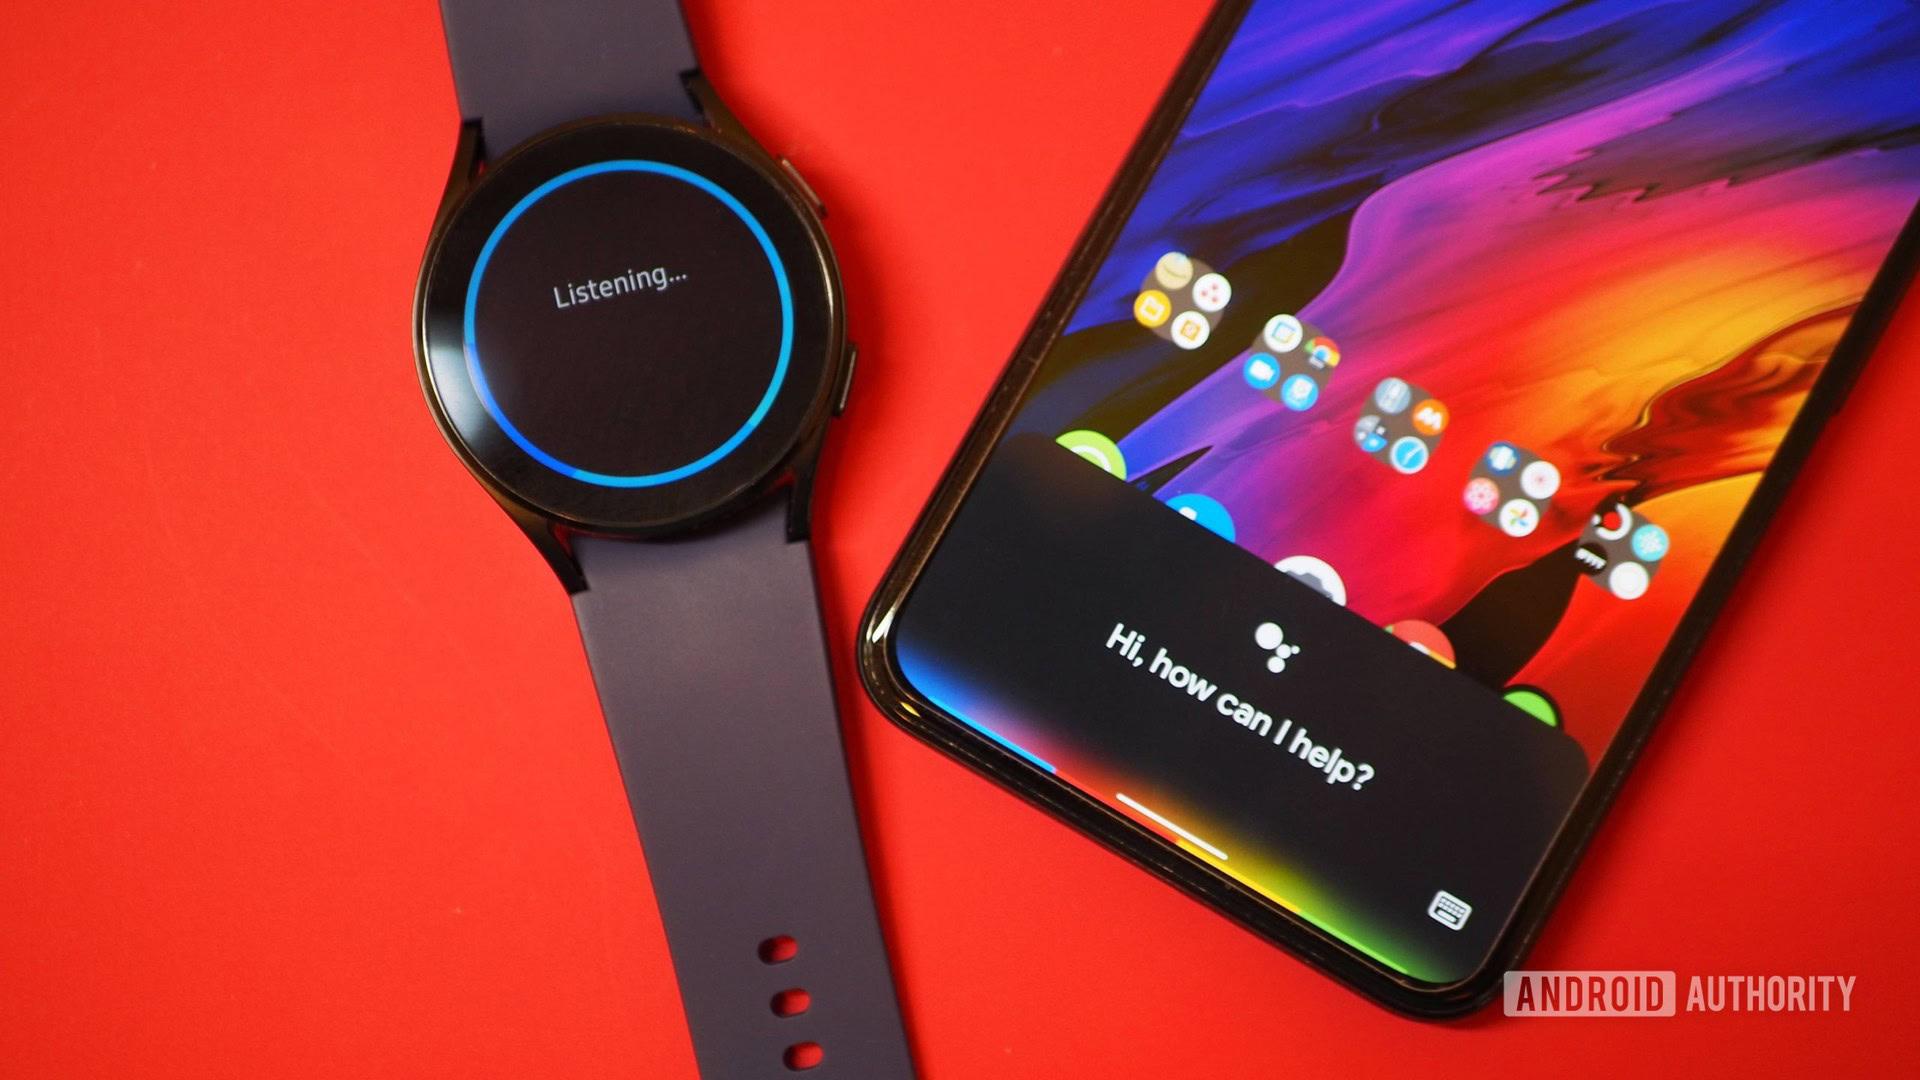 Samsung Bixby guide: Features, commands, and more - Android Authority